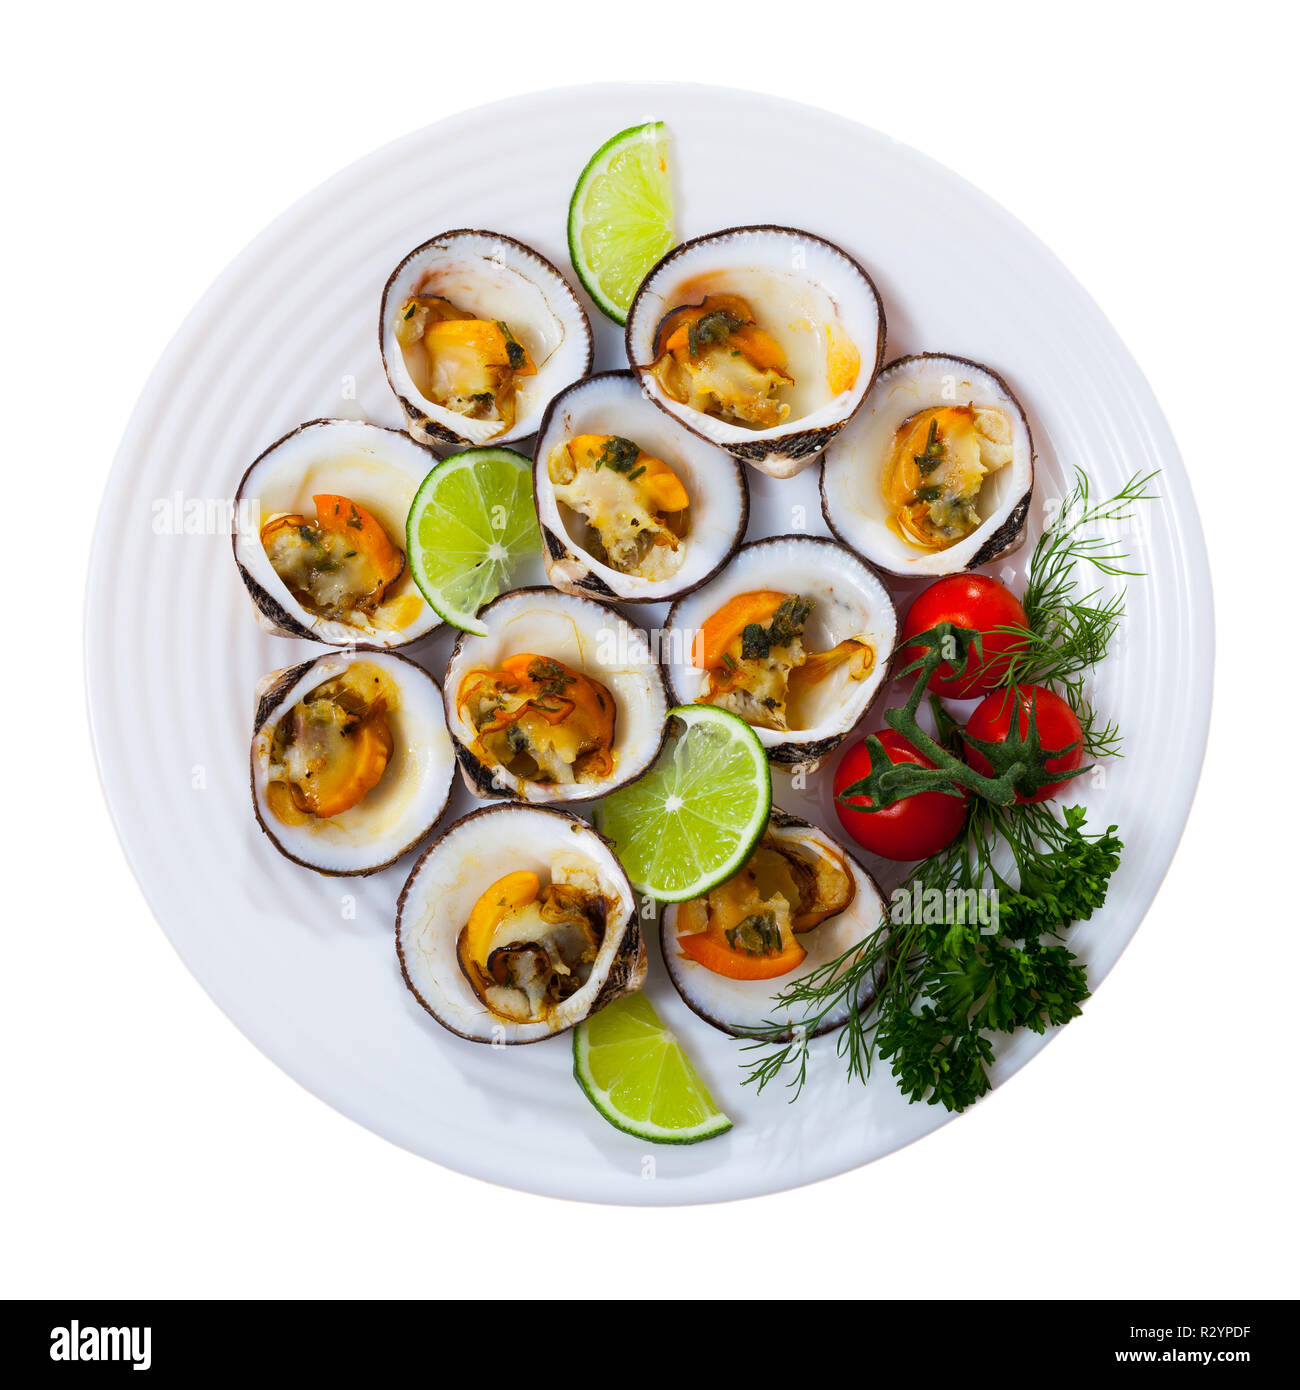 Top view of baked dog cockles served on white plate with lemon, cherry tomatoes and greens. Isolated over white background Stock Photo